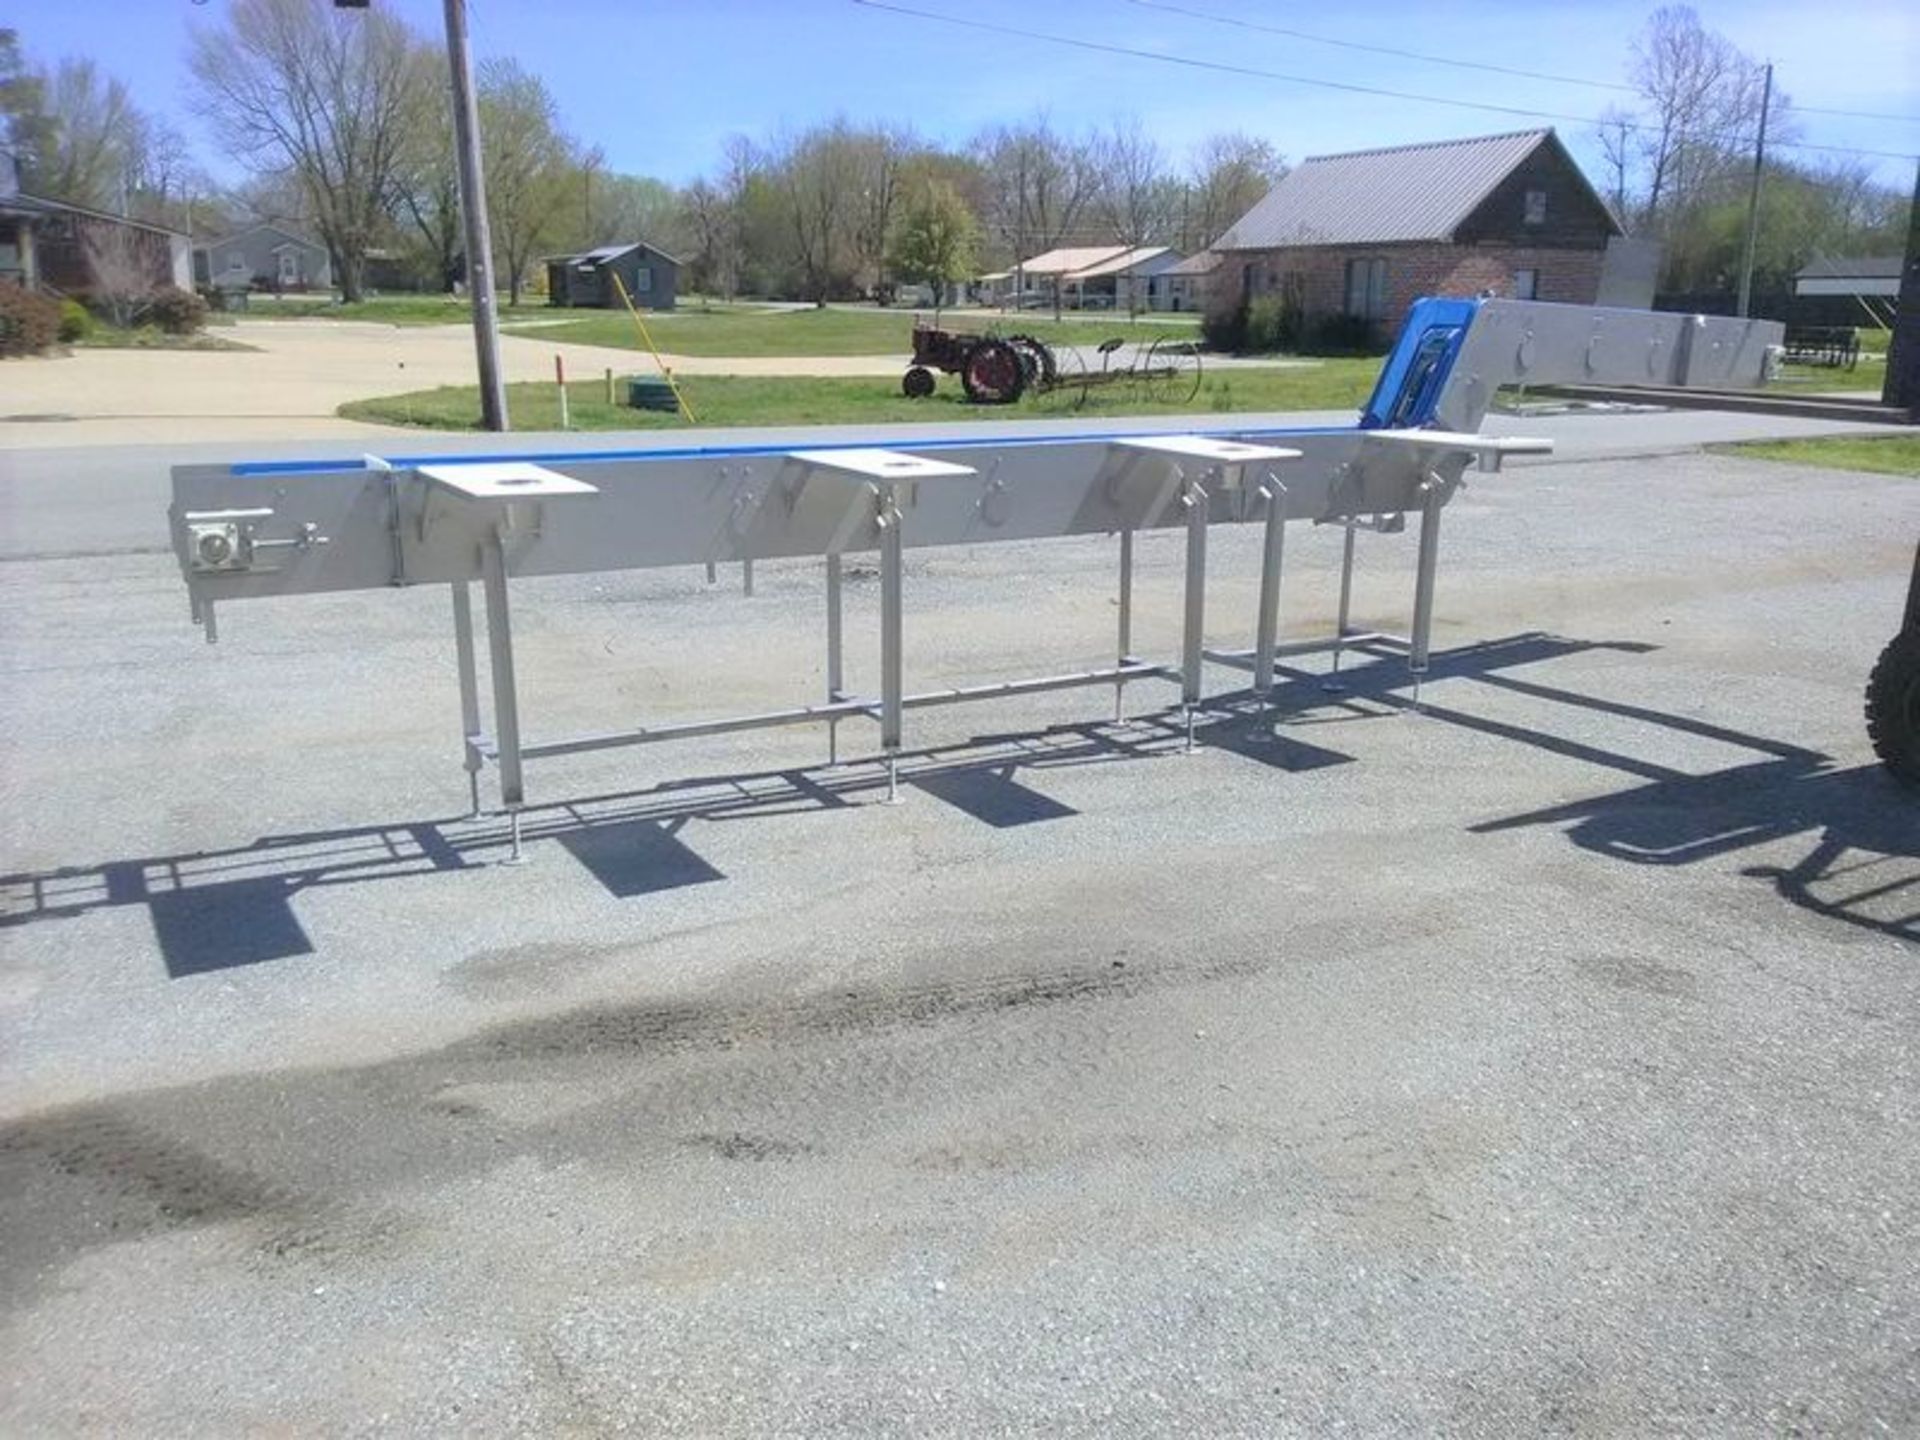 24'L x 12" W Sort and Elevate Conveyor - Image 4 of 5